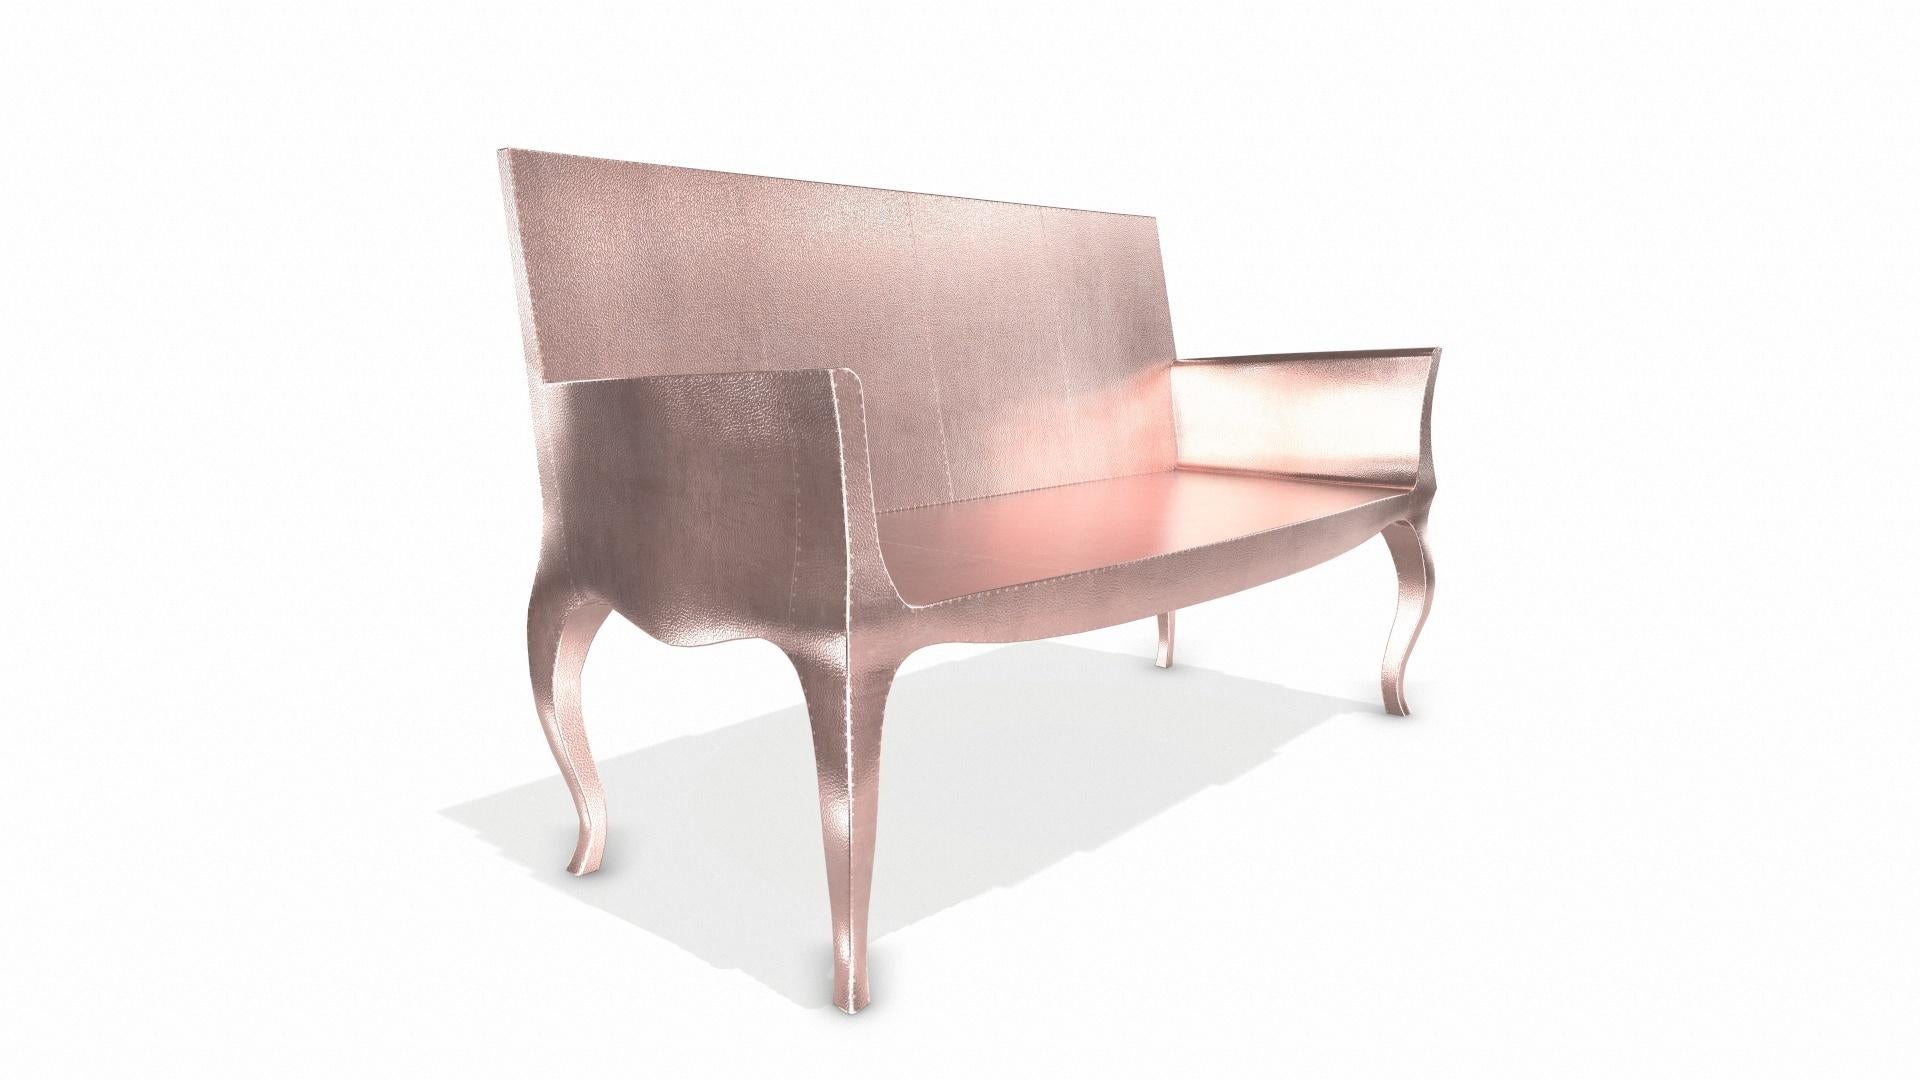 Louise Settee Art Deco Loveseats in Fine Hammered Copper by Paul Mathieu In New Condition For Sale In New York, NY